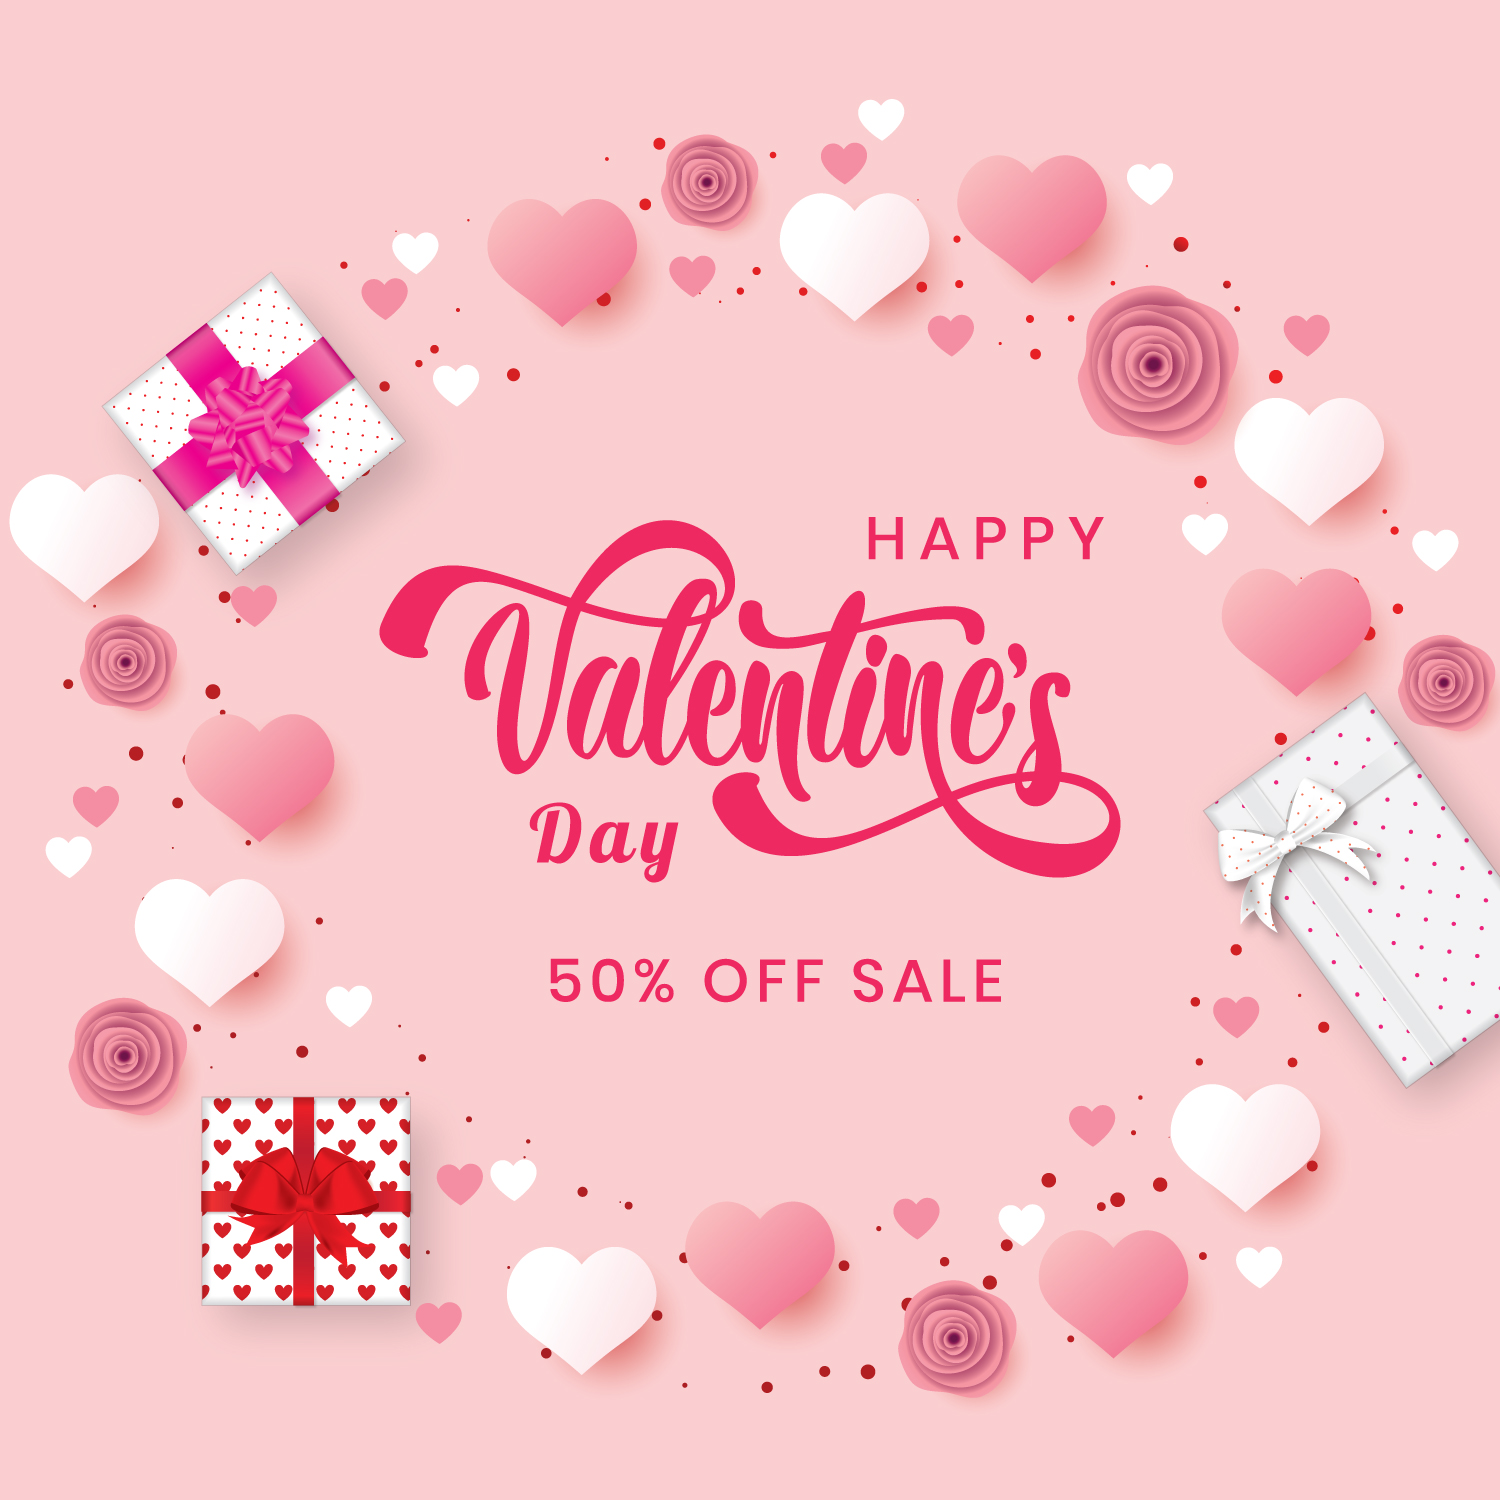 Download the wonderful and elegant Vector Hearts design for Valentine's Day and happy marital occasions